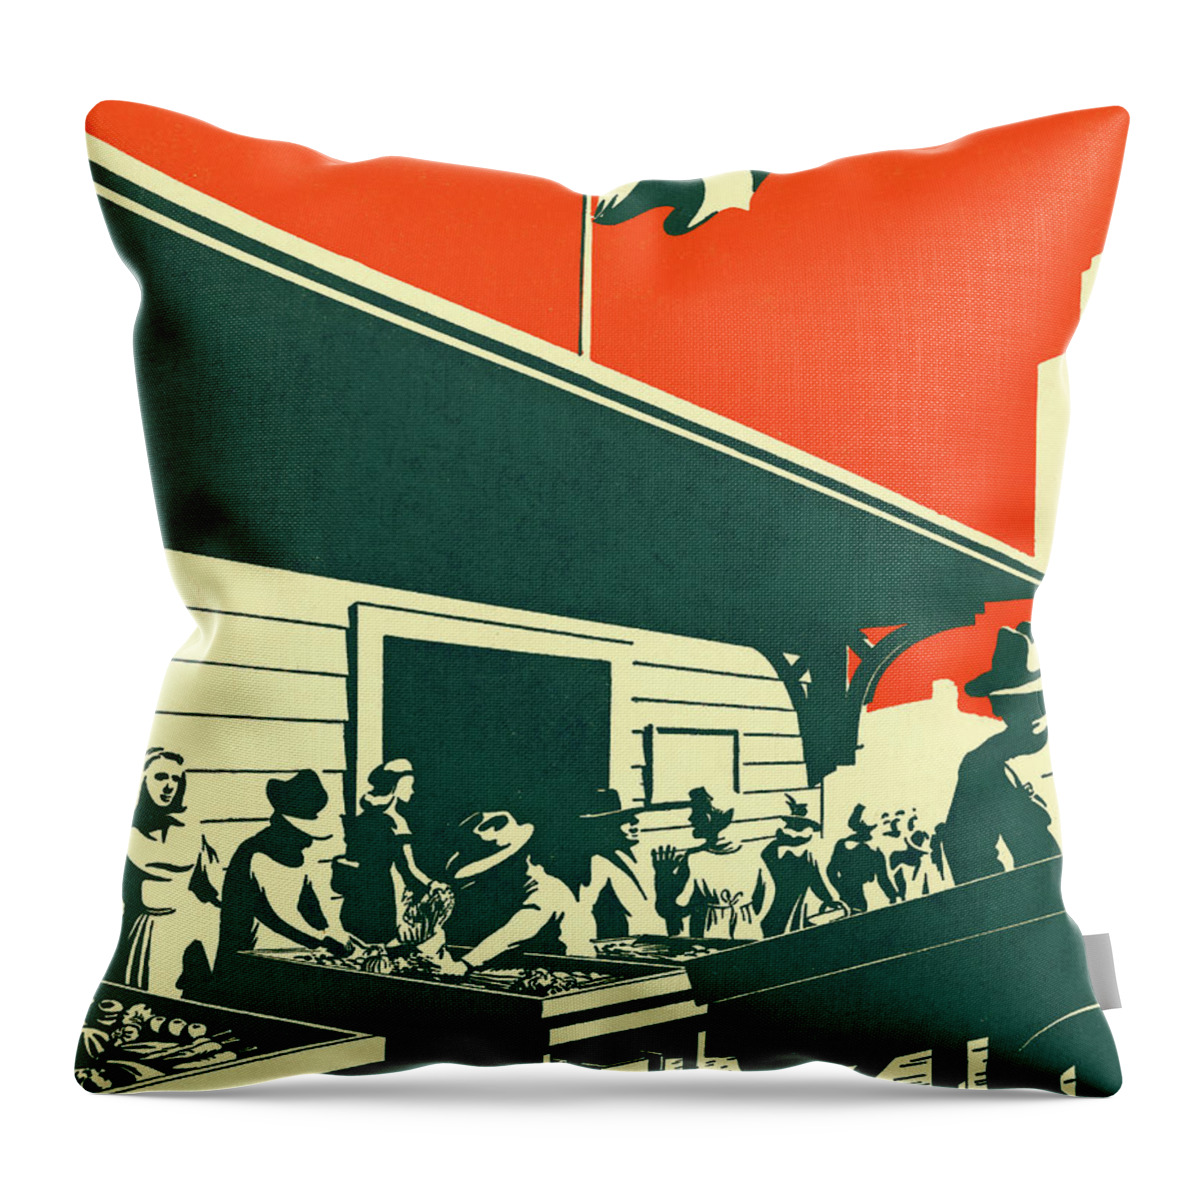 Architecture Throw Pillow featuring the drawing People at Tables Outside a Building by CSA Images